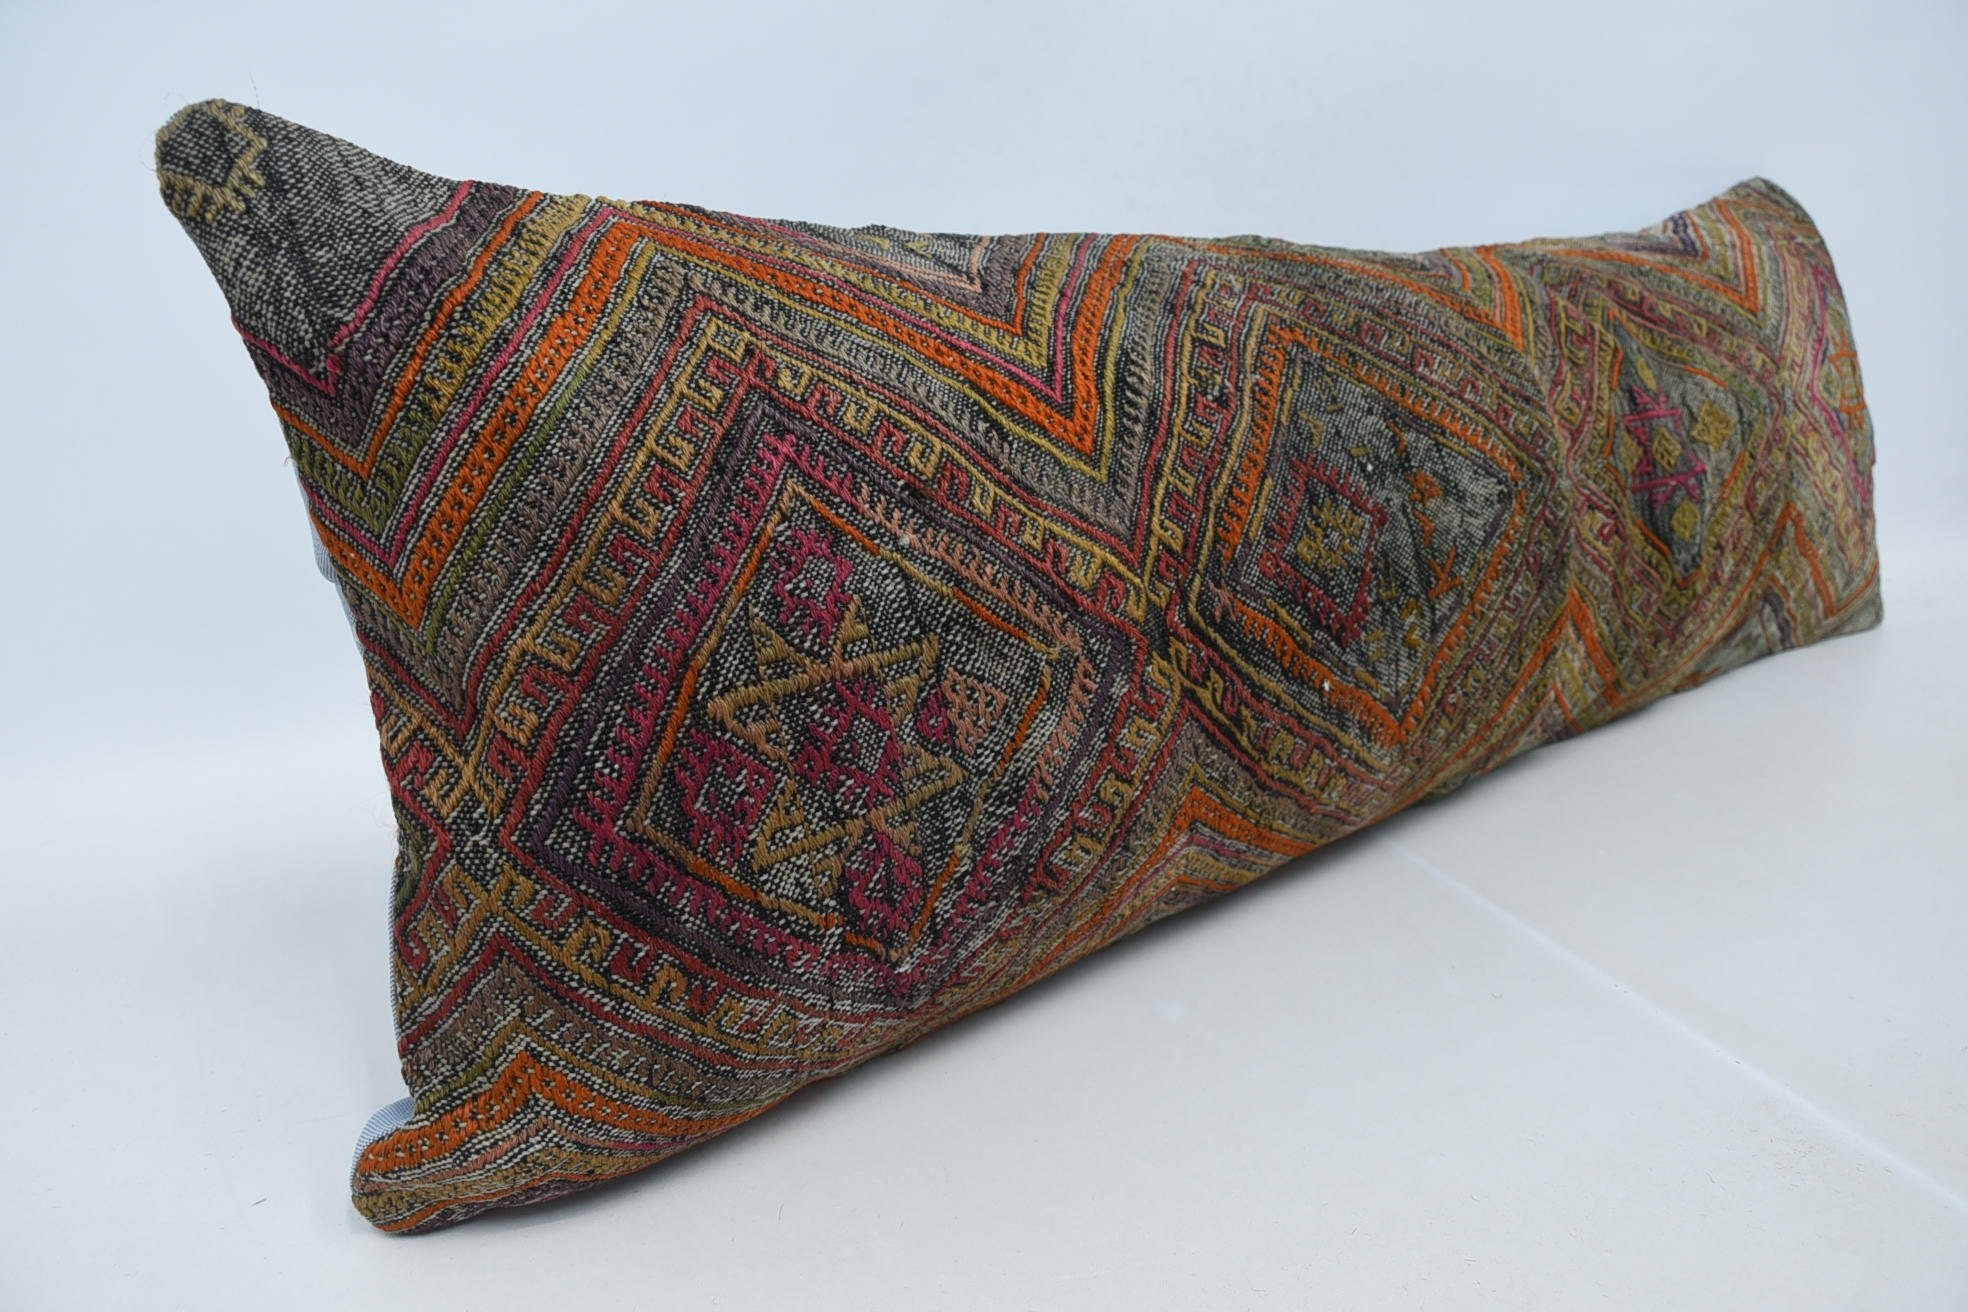 Christmas Cushion Cover, Pillow for Couch, Gift Pillow, Handmade Pillow Case, 16"x48" Red Pillow, Kilim Pillow